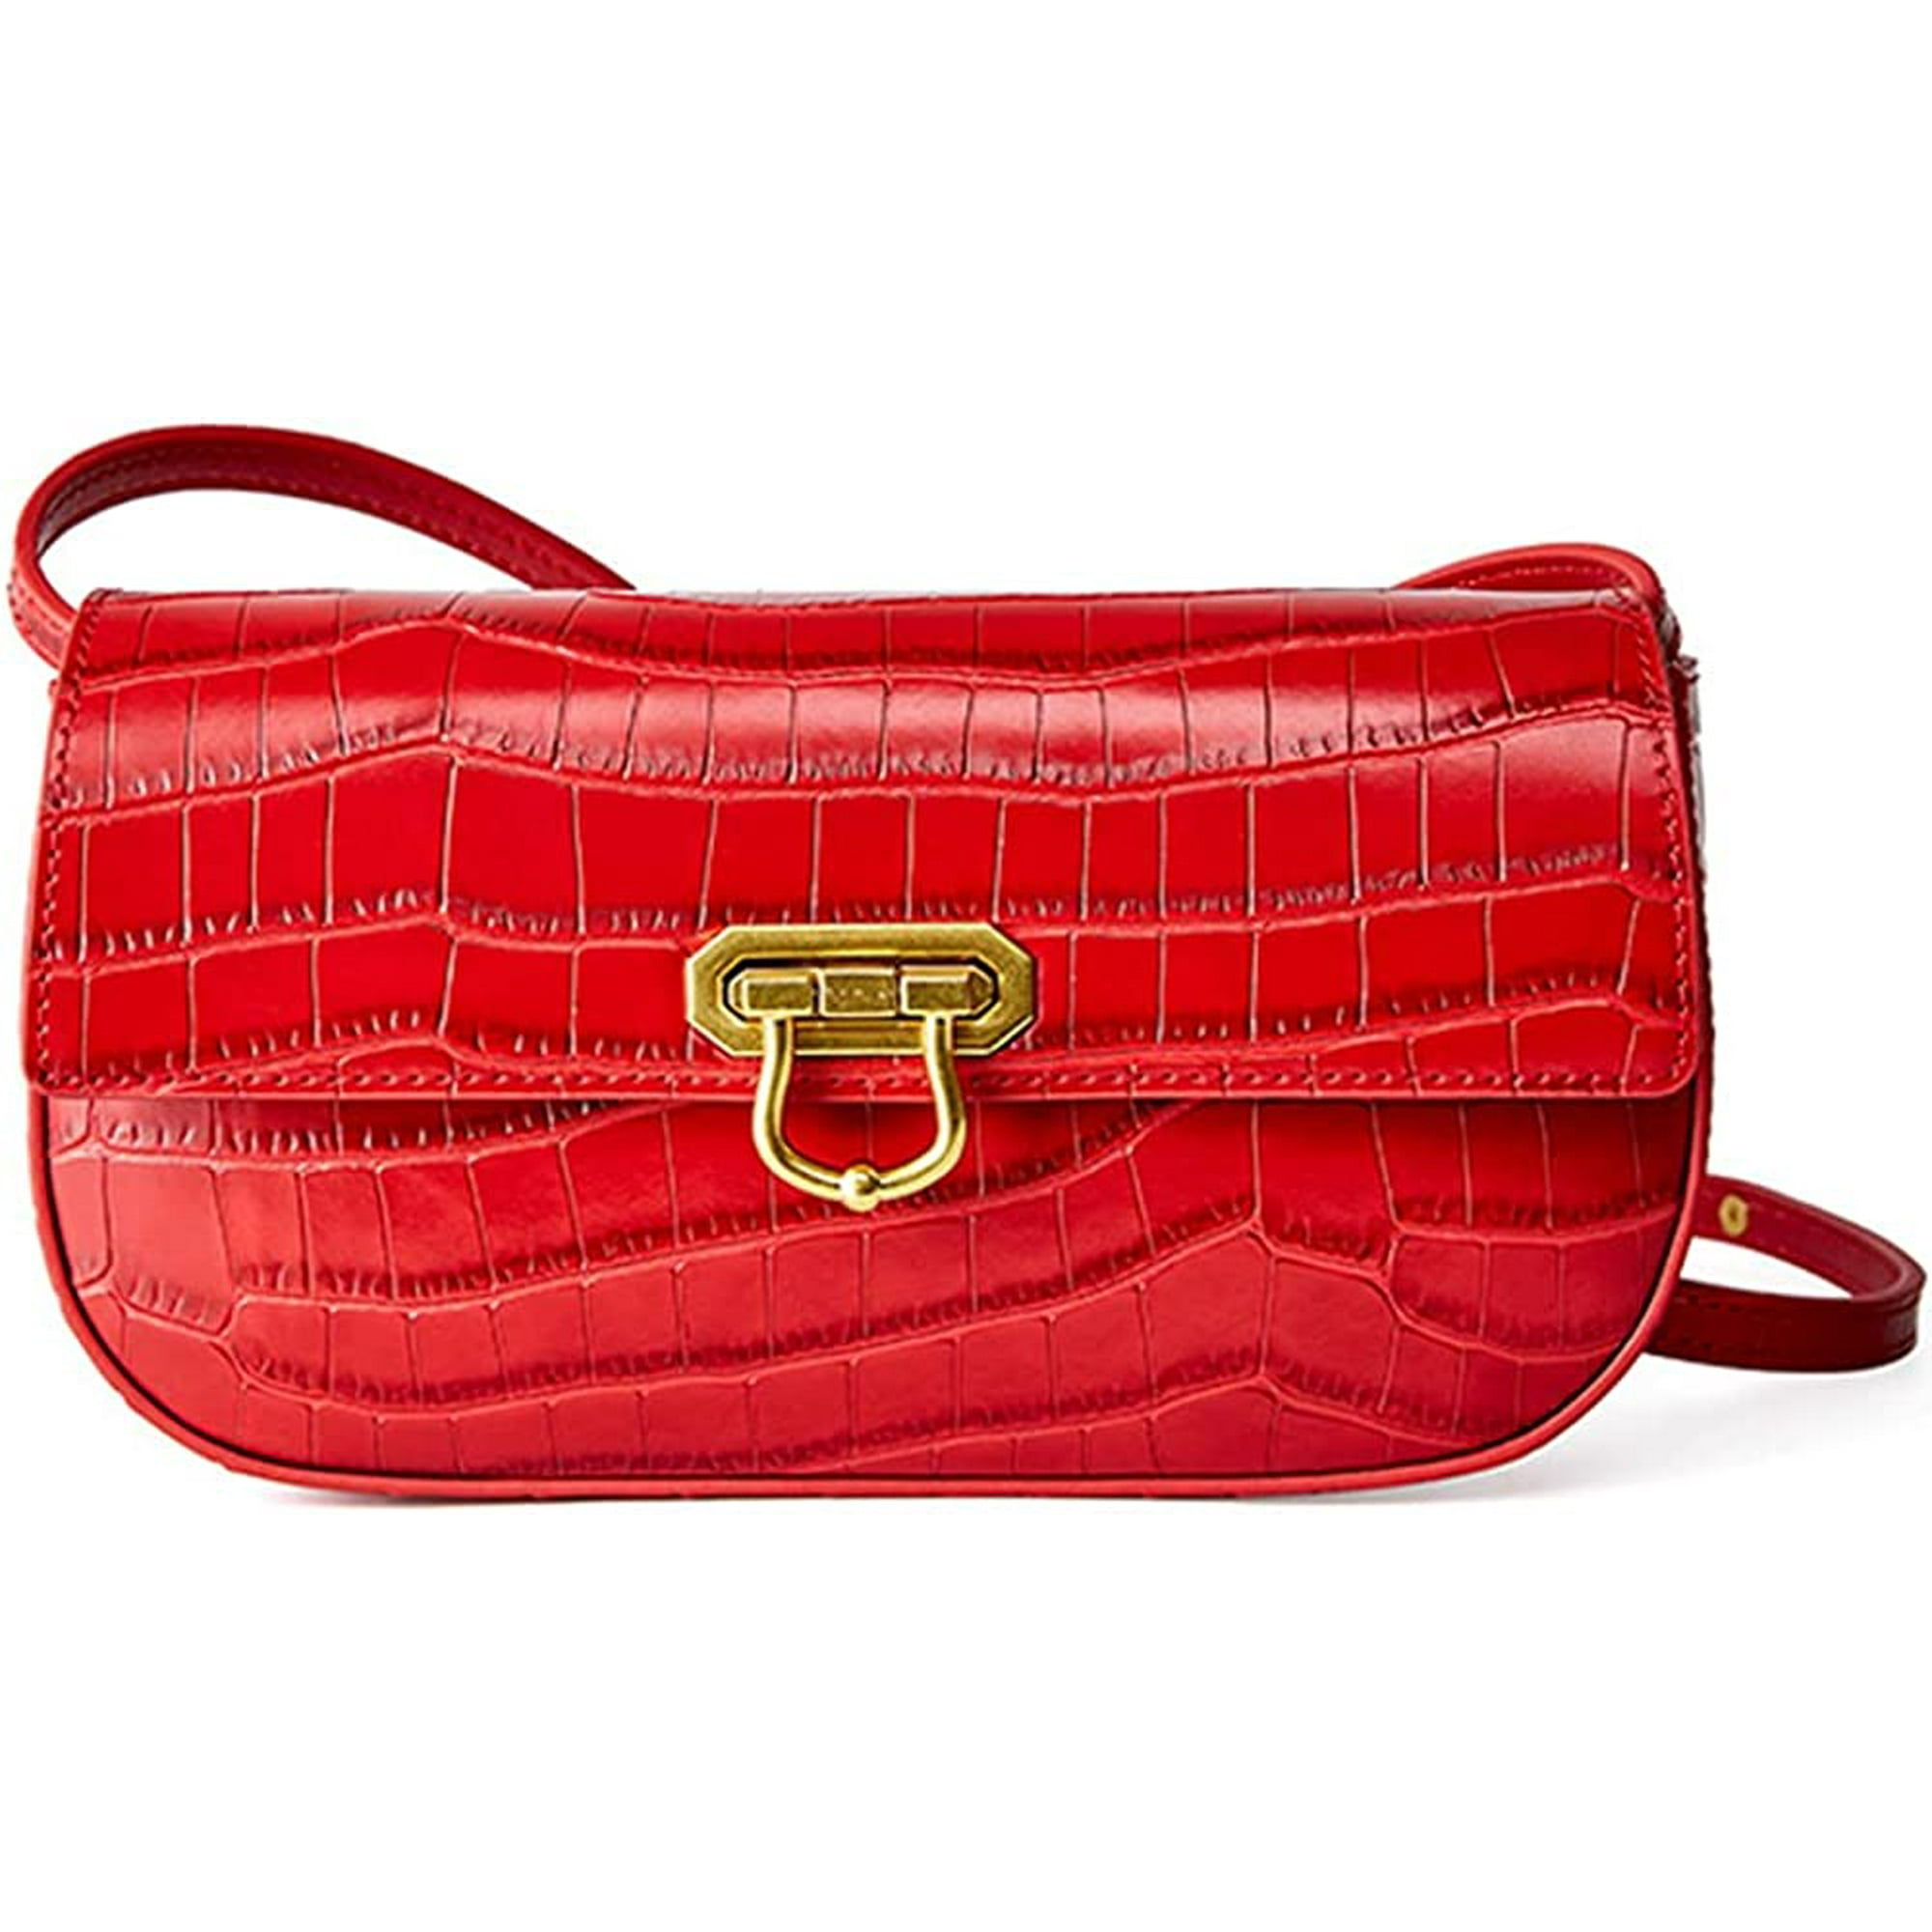 Shoulder bag with crocodile print and logo Woman, Red